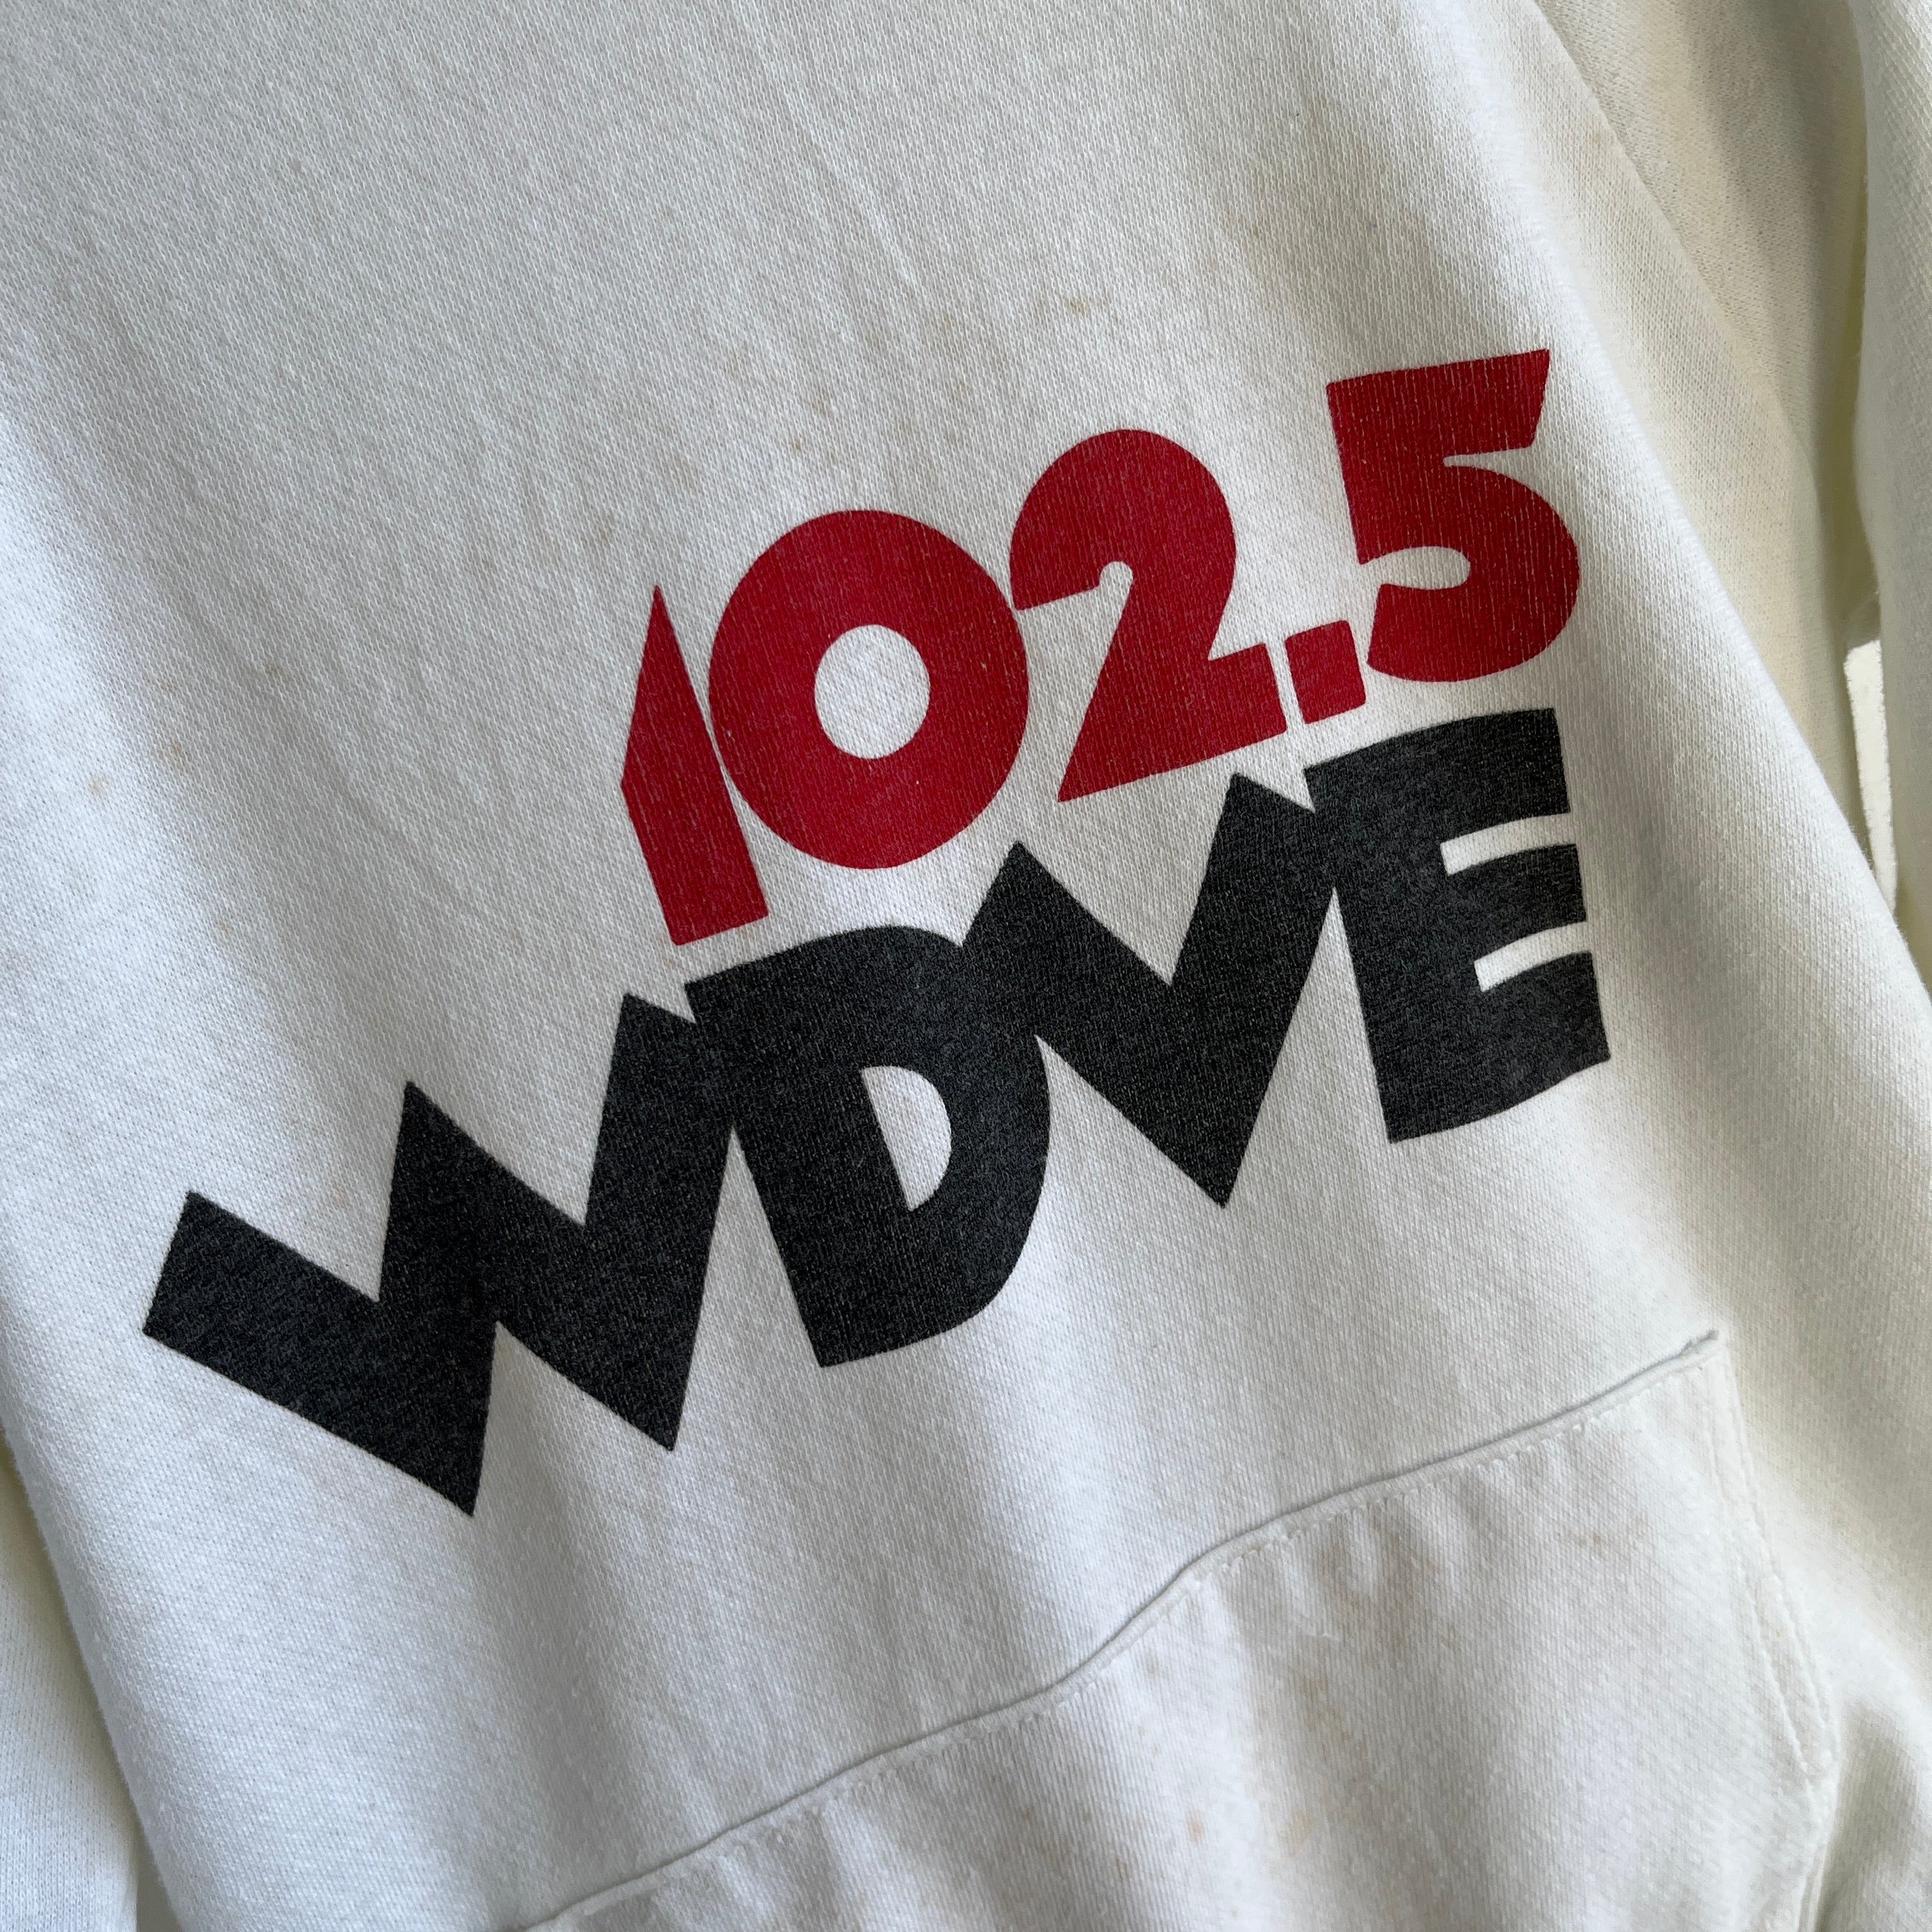 1980s 102.5 WDVE - Pittsburg Classic Rock Station Hoodie